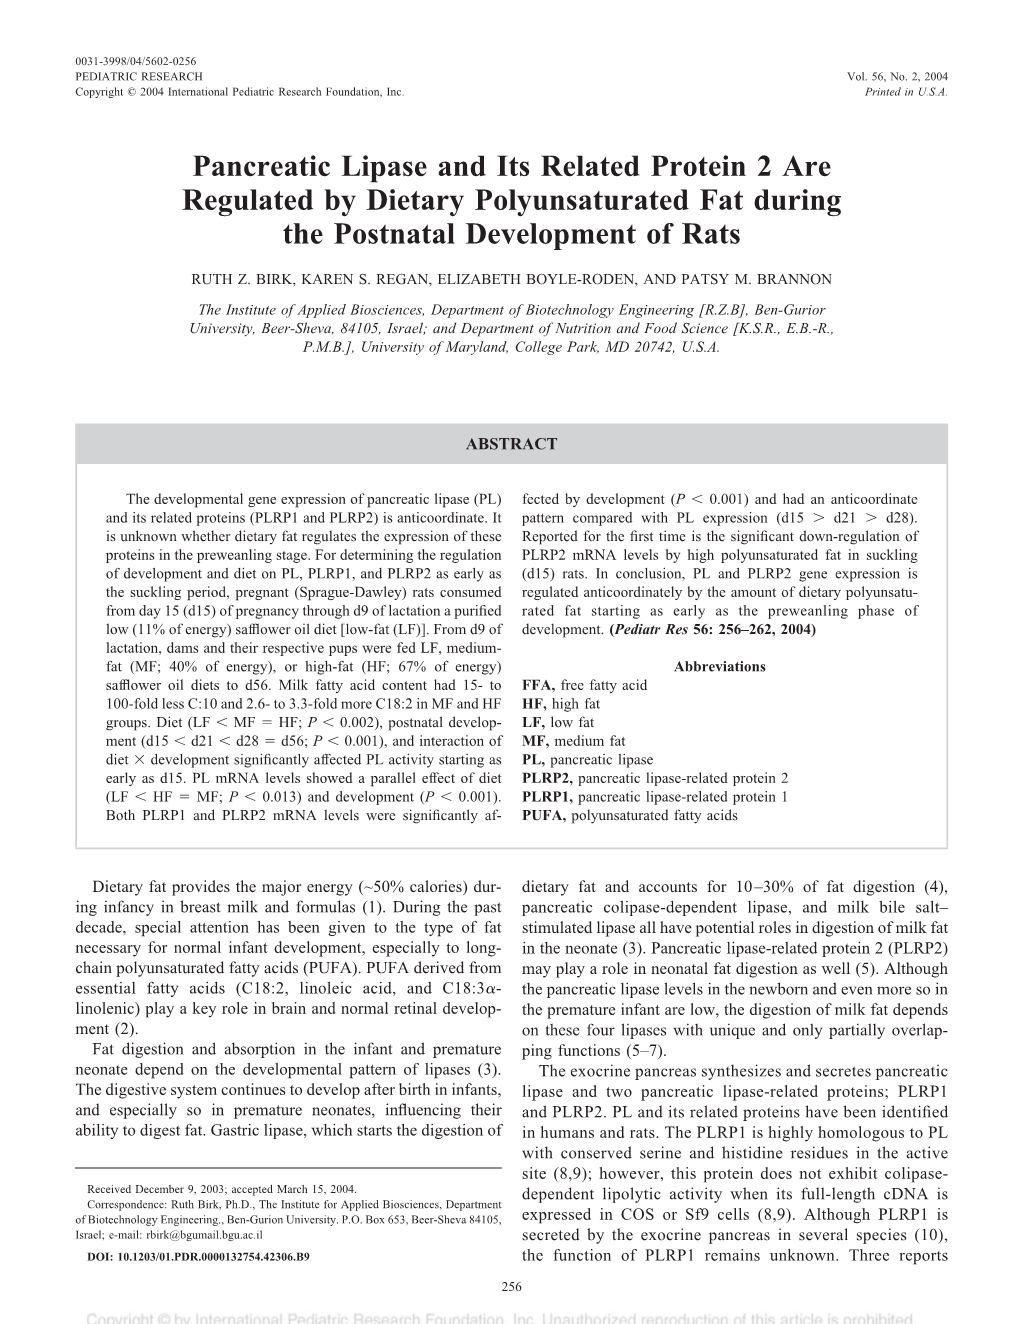 Dietary Fat Provides the Major Energy (~50% Calories) Dur- Dietary Fat and Accounts for 10–30% of Fat Digestion (4), Ing Infancy in Breast Milk and Formulas (1)